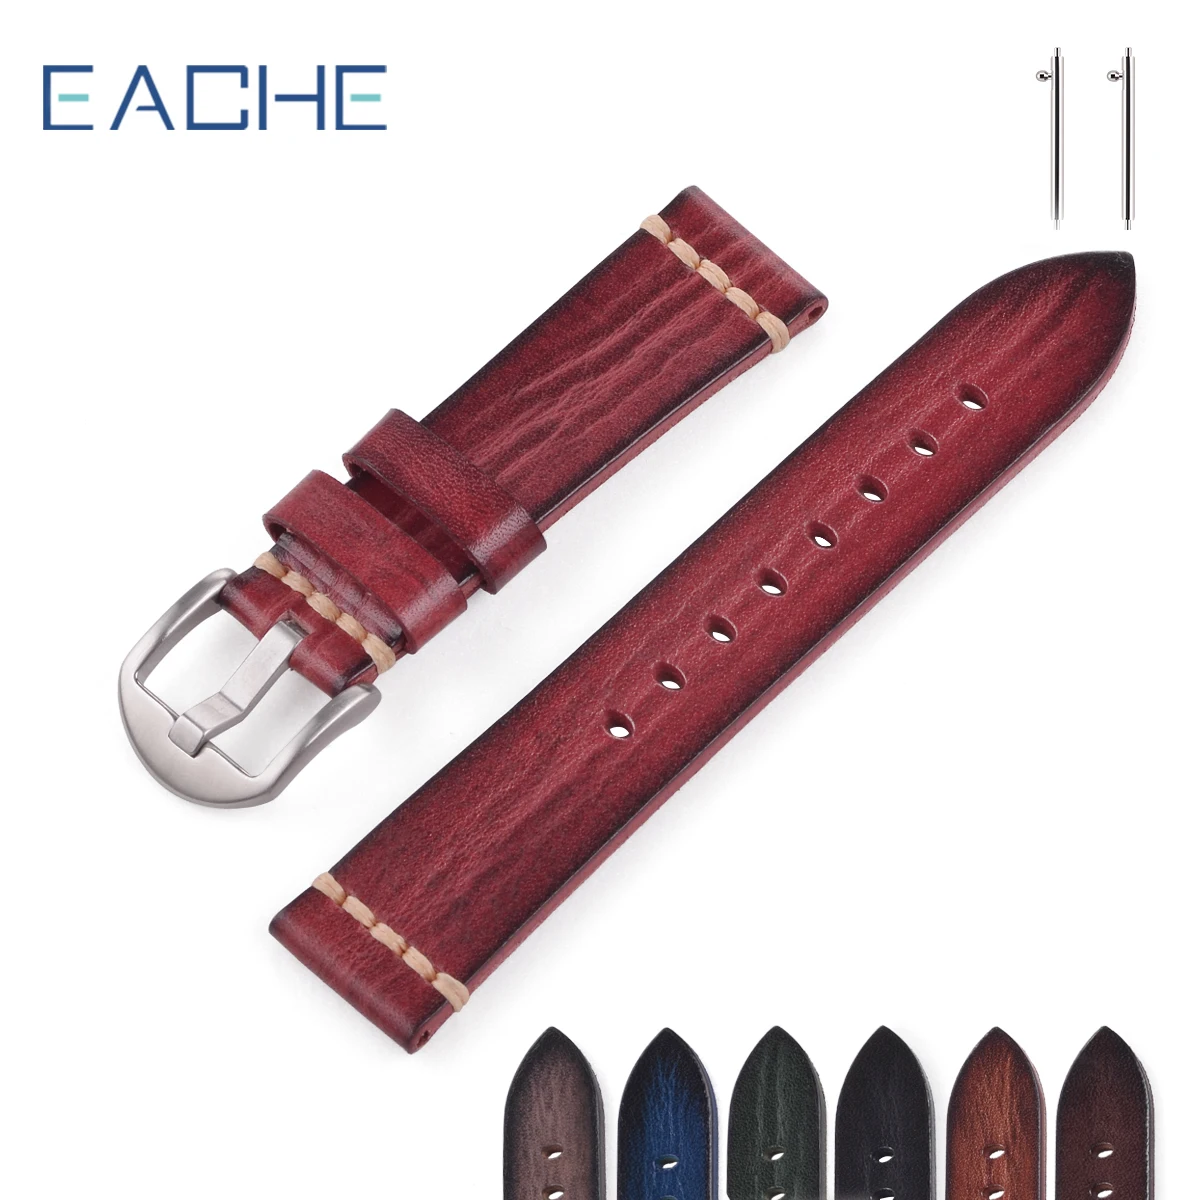 

EACHE Italian Vegetable Tanned Leather Handmade Sports Blank Watches Straps Band With Quick Release Leather Watch Strap